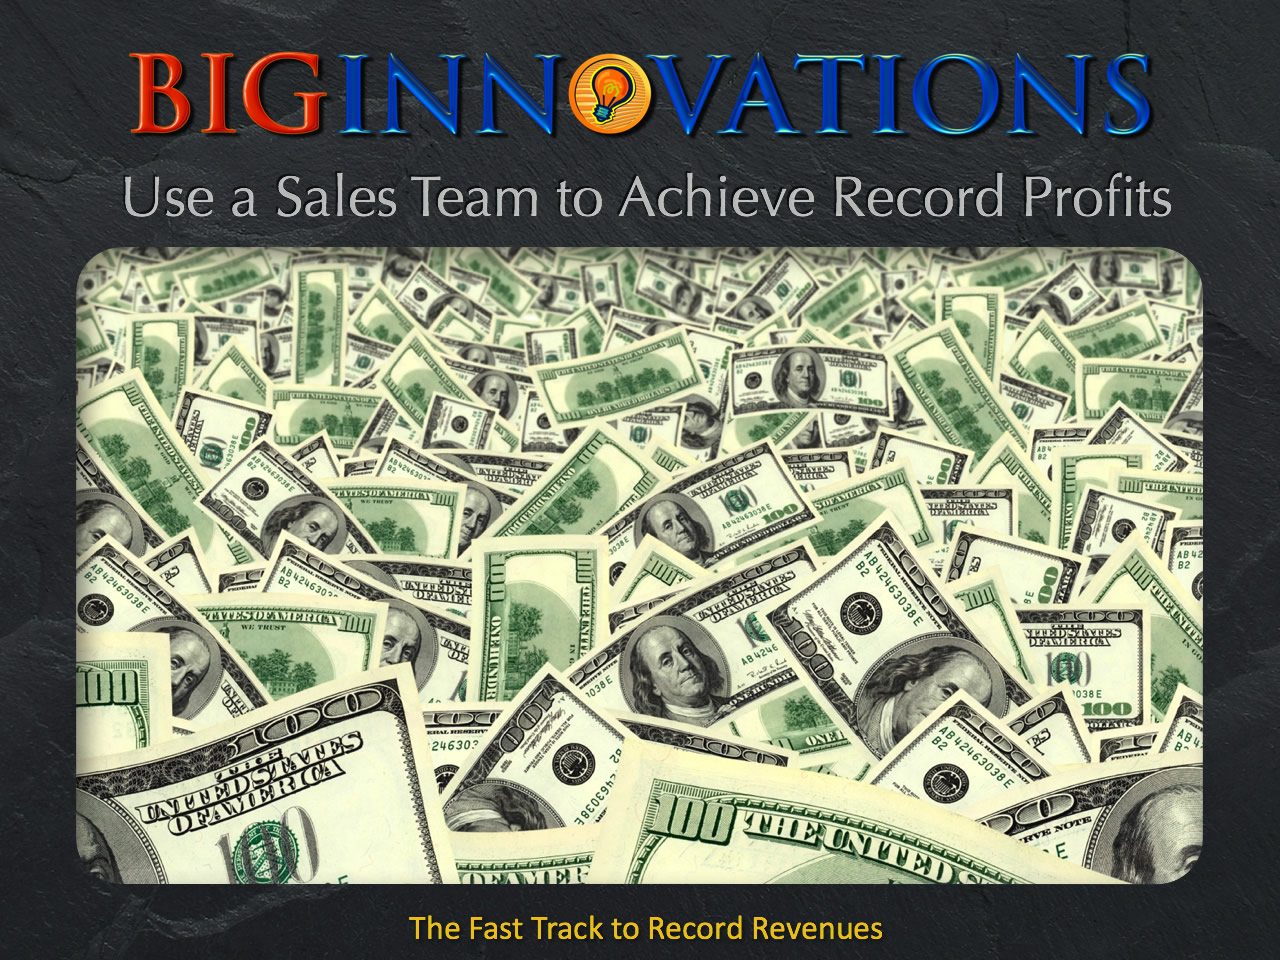 Adding or enhancing a sales team can help you grow company sales to all-time records